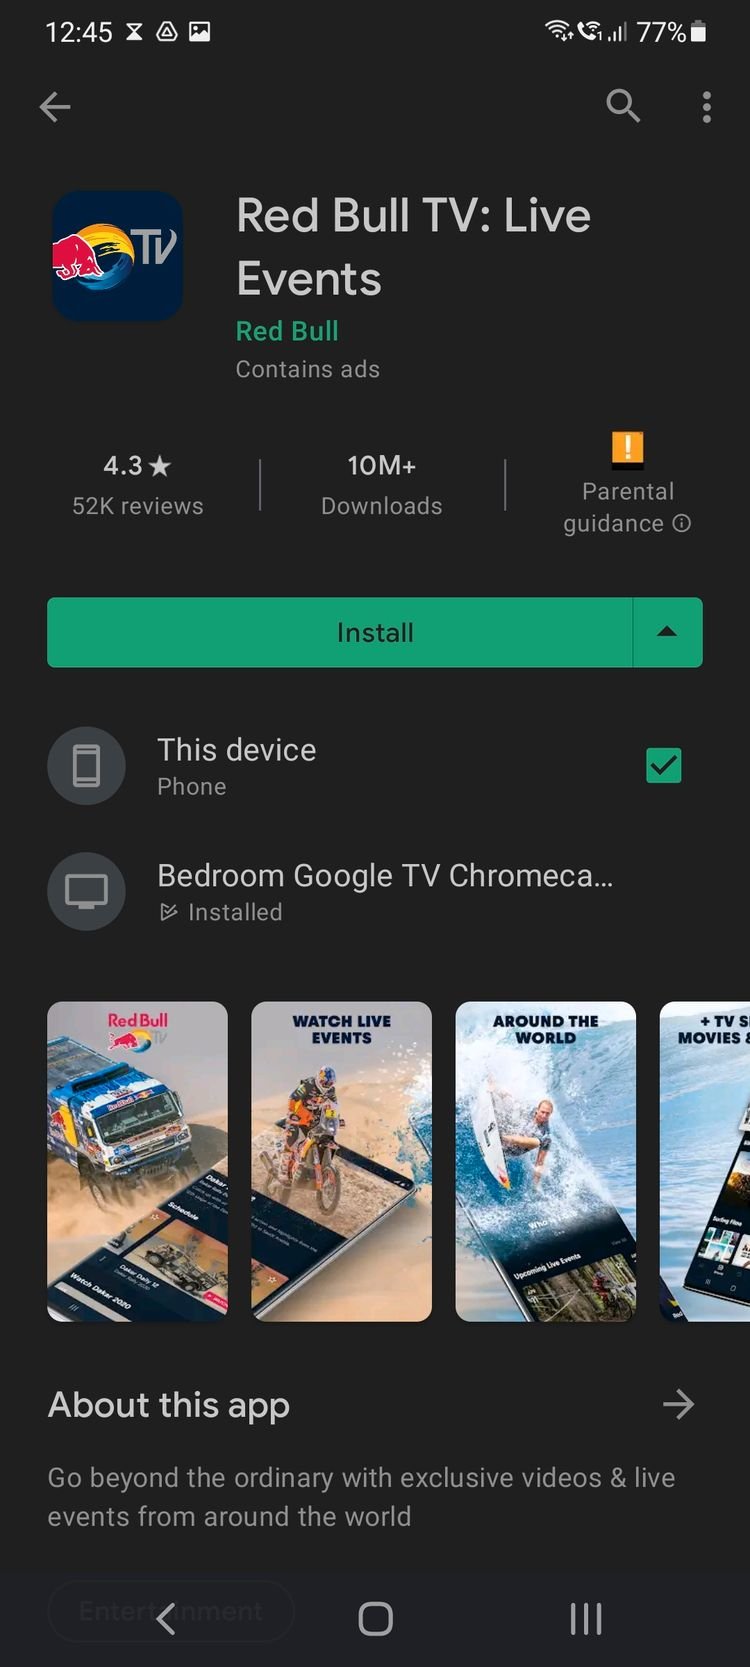 Google Brings Ability to Install Apps on Android TV Through Smartphones,  Users Report